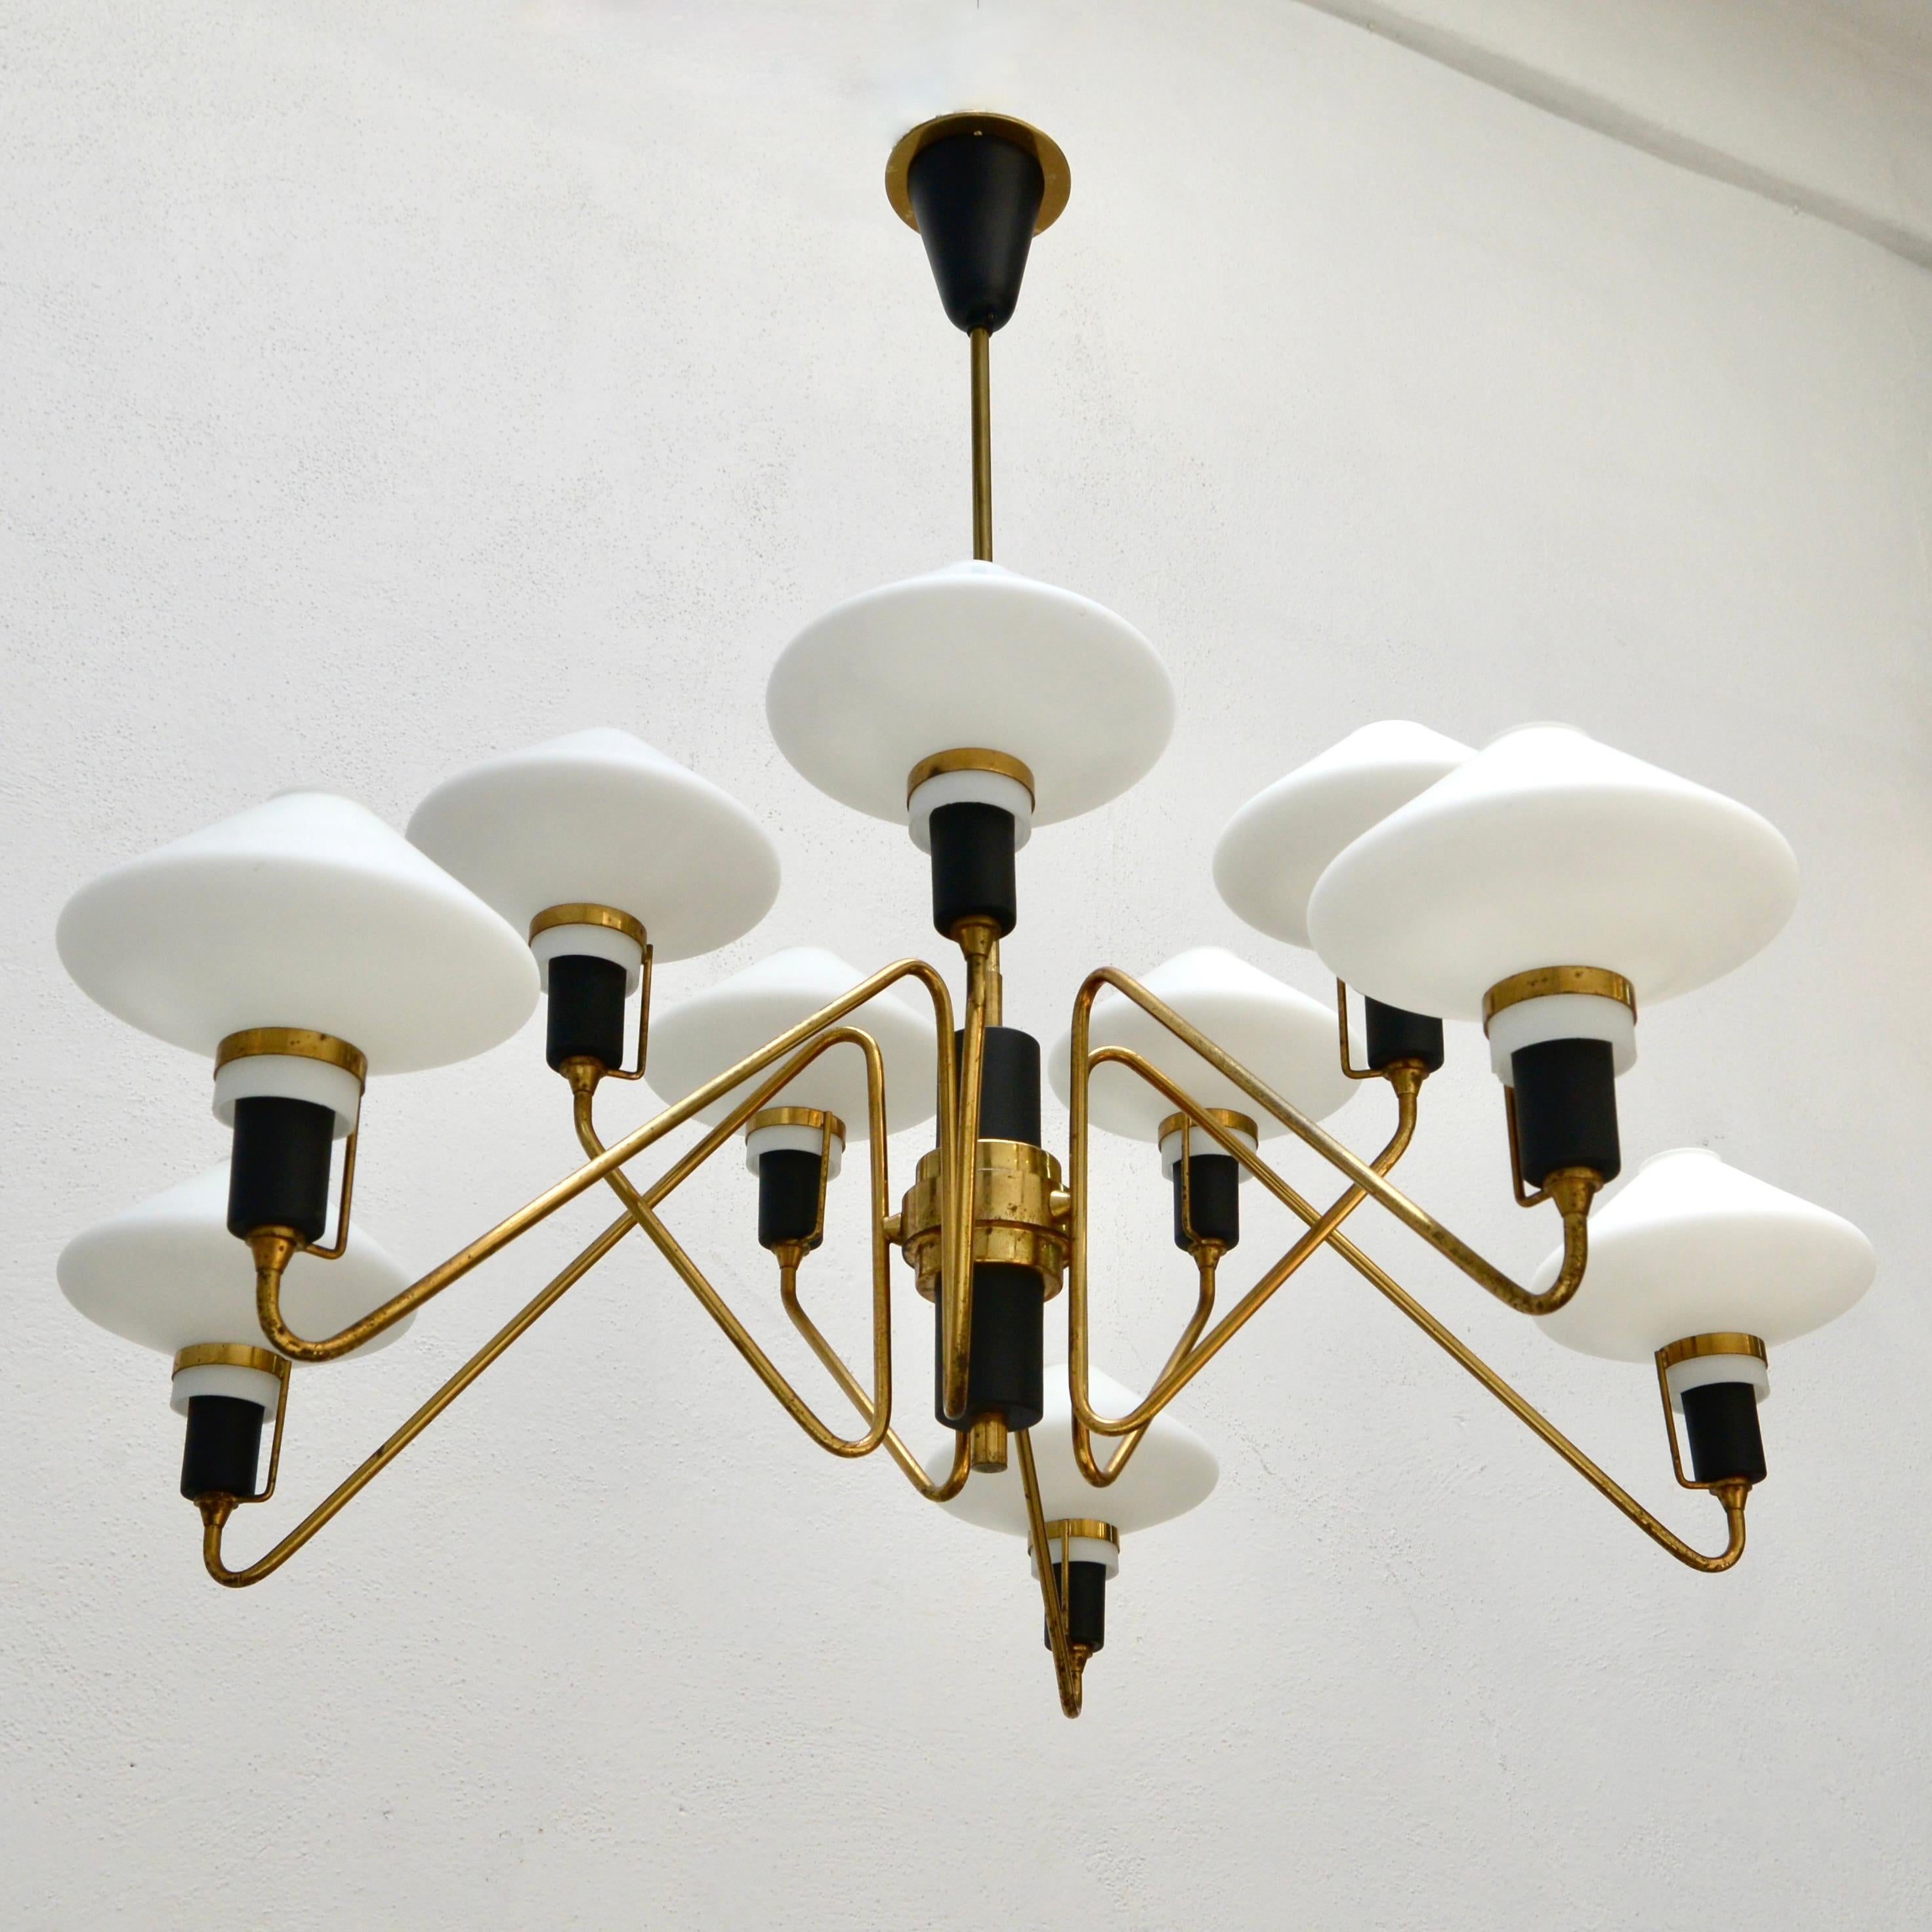 Original finish, partly restored of the period mid century Italian 1950s brass, aluminum and glass chandelier with 10 hand blown glass shades by Lumen of Italy. Wired with 10-E12 candelabra based sockets for use in the US. Light bulbs included with